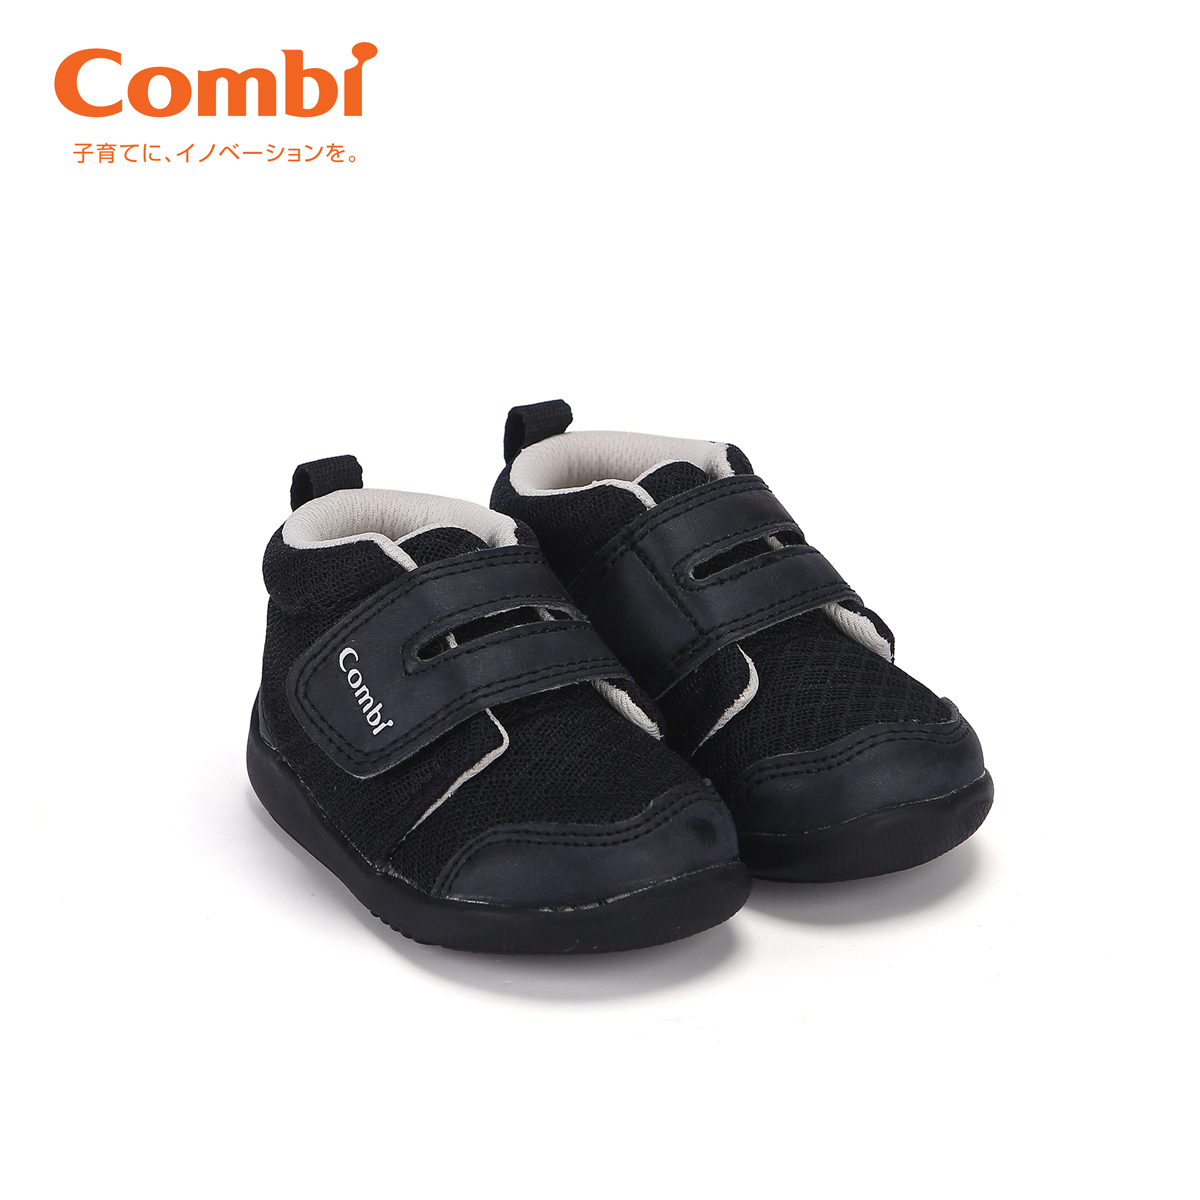 Giầy cao cổ Combi Classic size 12.5